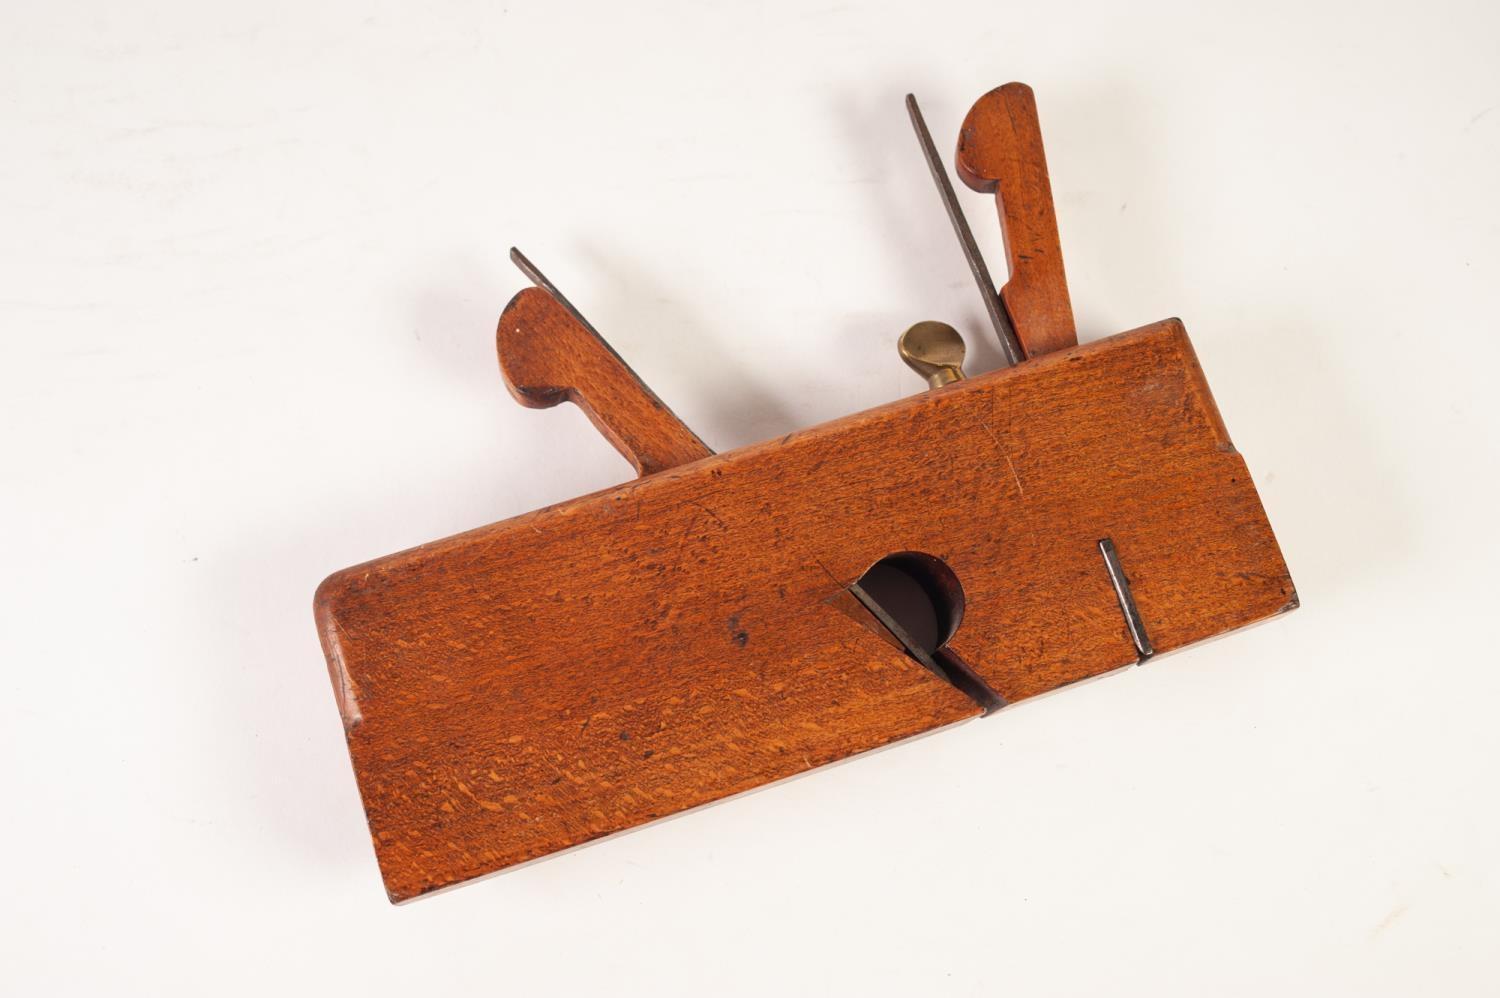 VINTAGE HARDWOOD AND BRASS REBATE/ SCRIBING PLANE, with two steel blades, 9 1/2" (24.1cm) long, 1 - Image 2 of 3